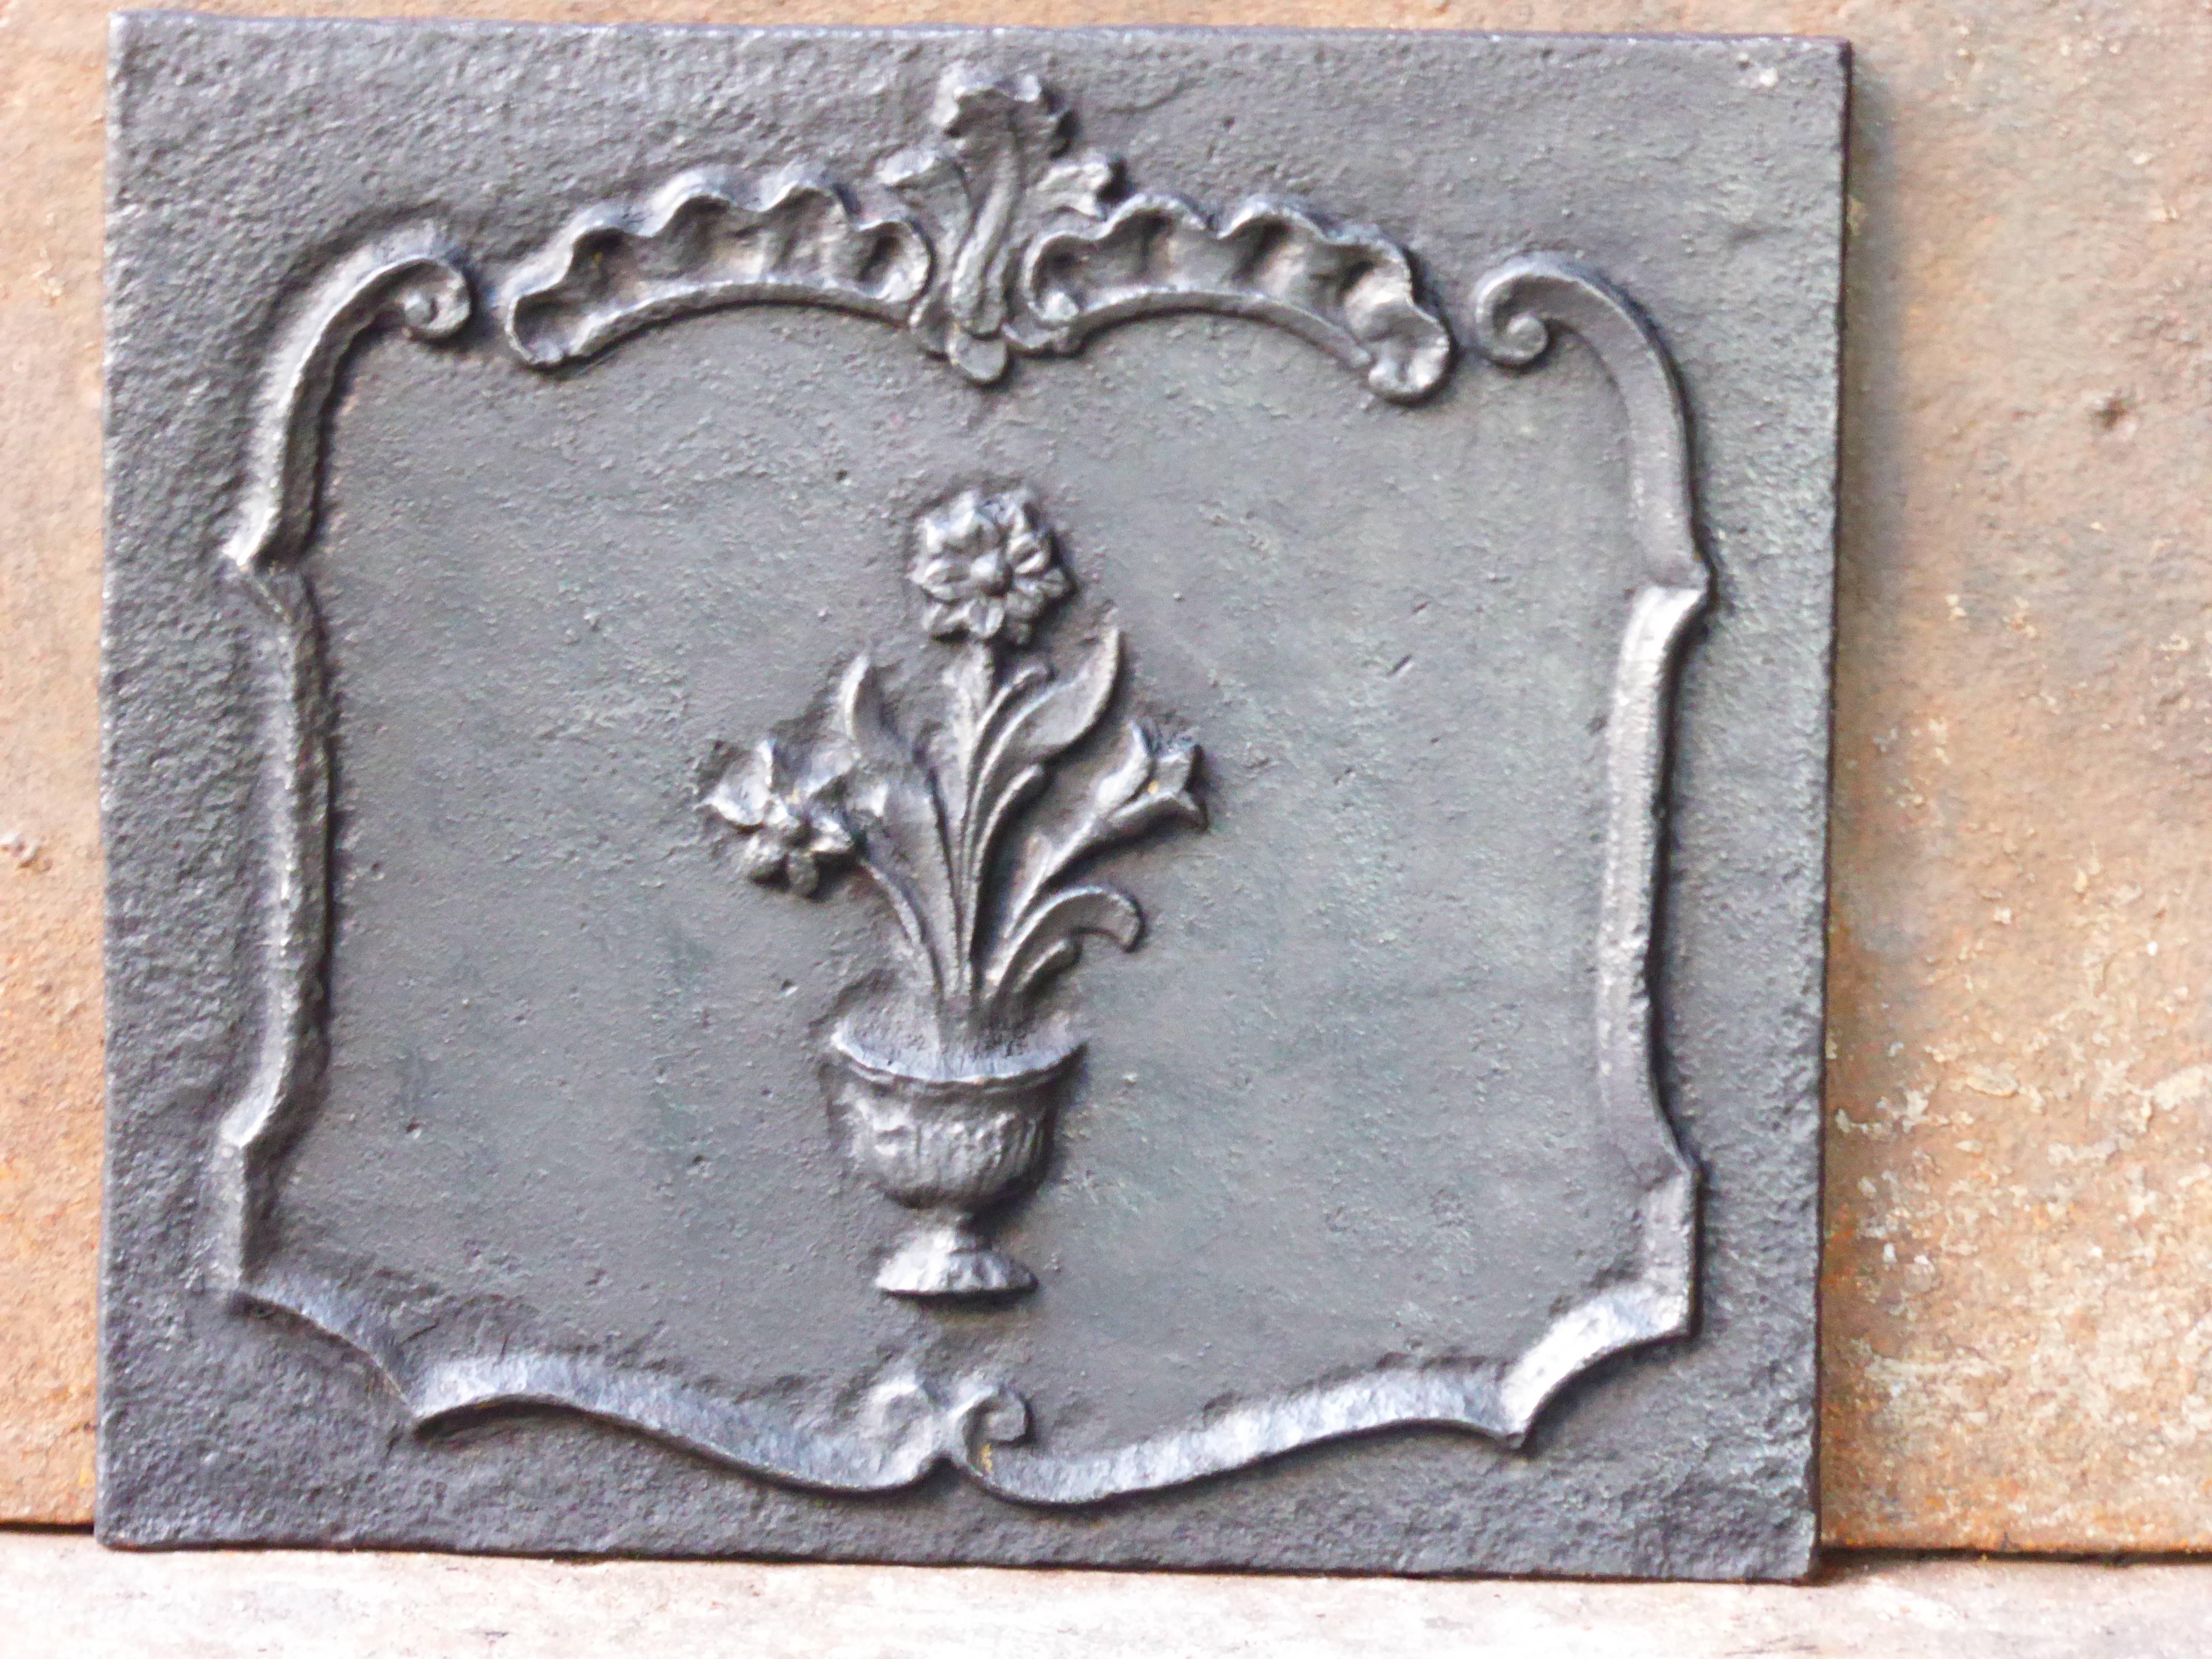 19th century French fireback with a flower basket.